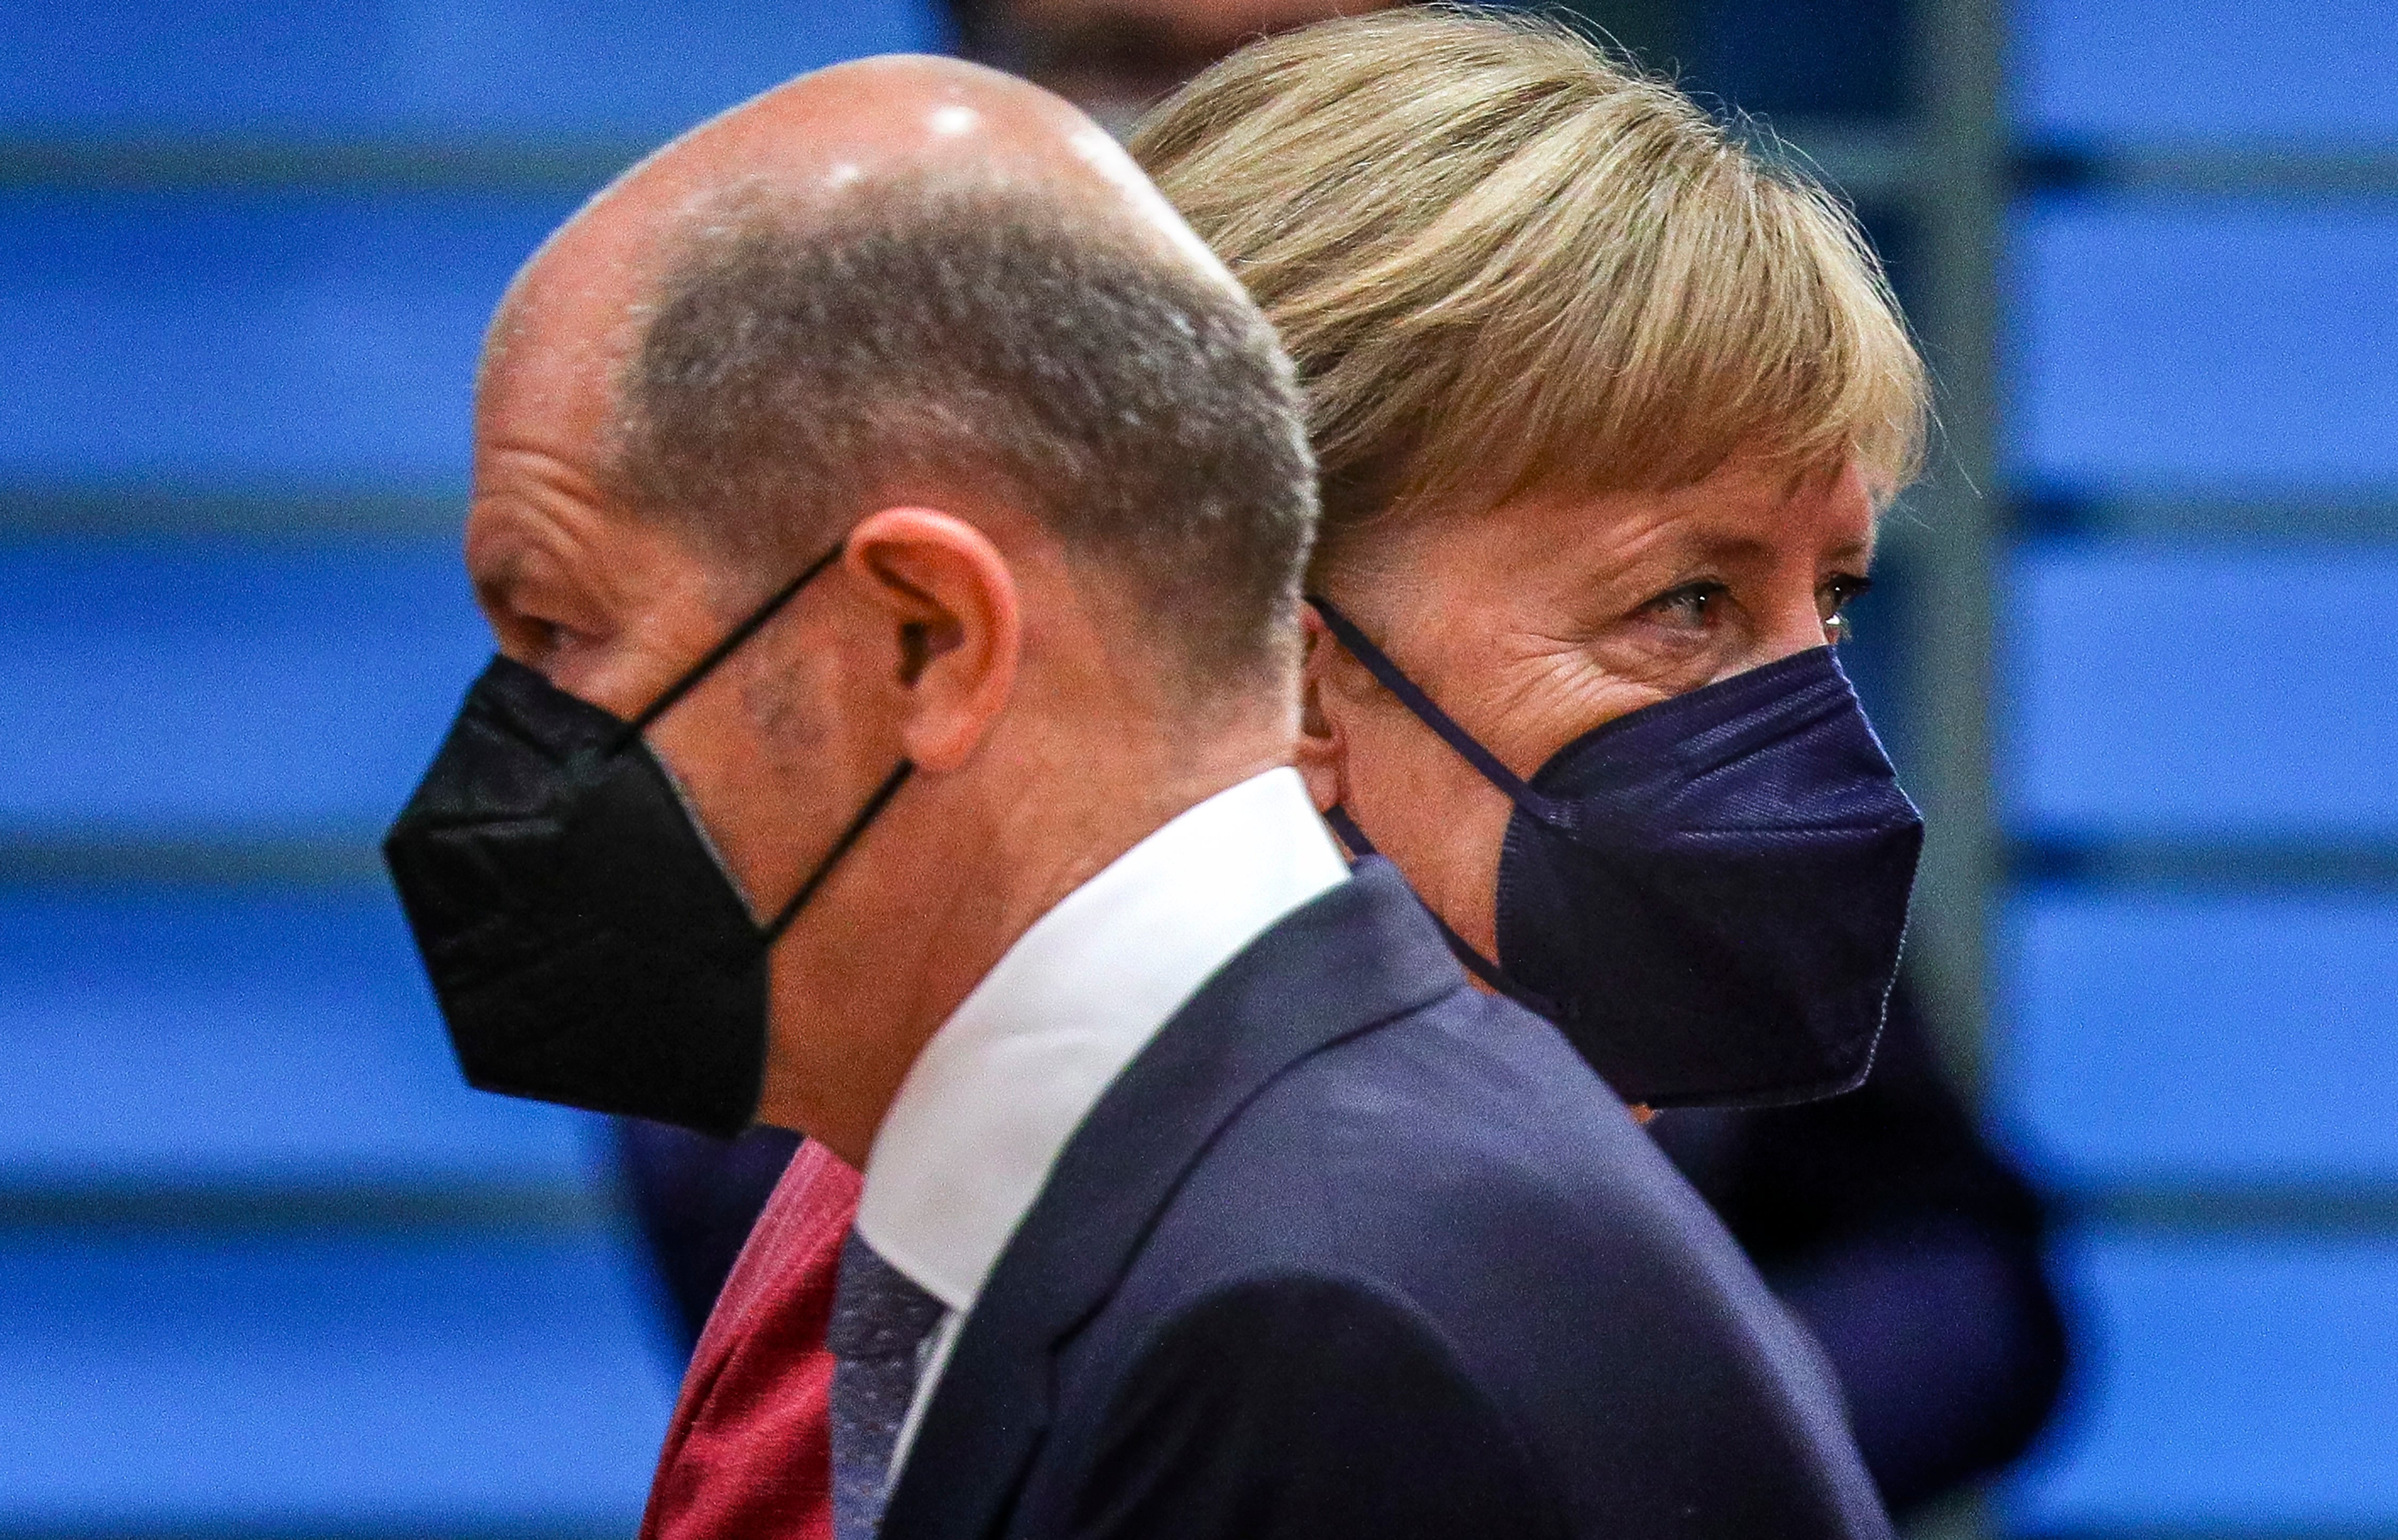 The German minister of finance, Olaf Scholz (left), passes by the German chancellor, Angela Merkel, at the weekly government cabinet meeting in Berlin